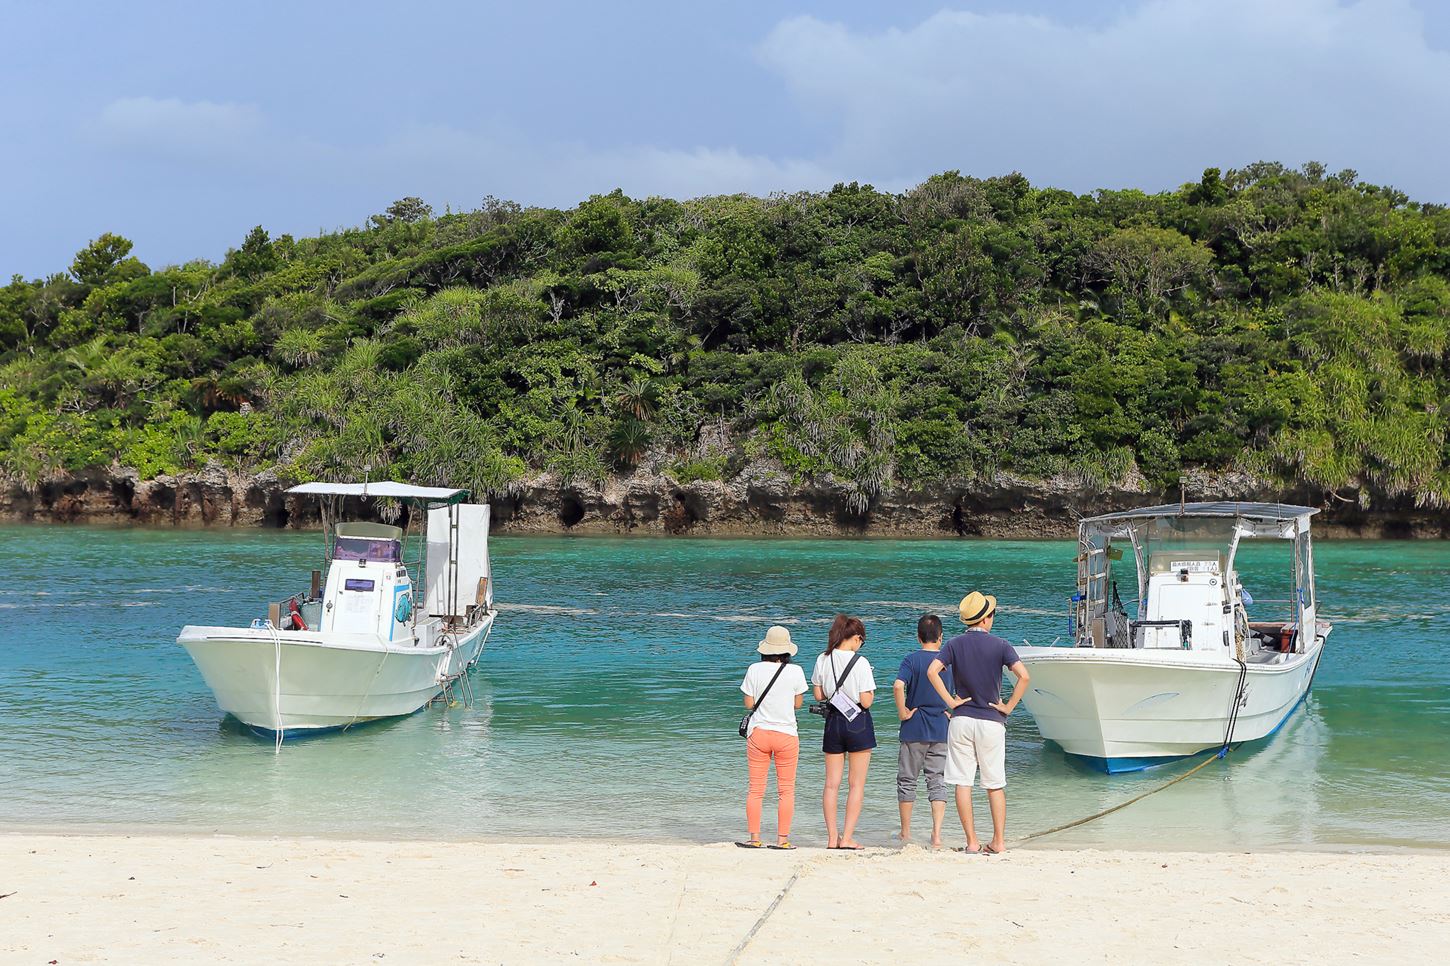 Sightseeing scenery that simply shows the weather and clothes in Okinawa in August2